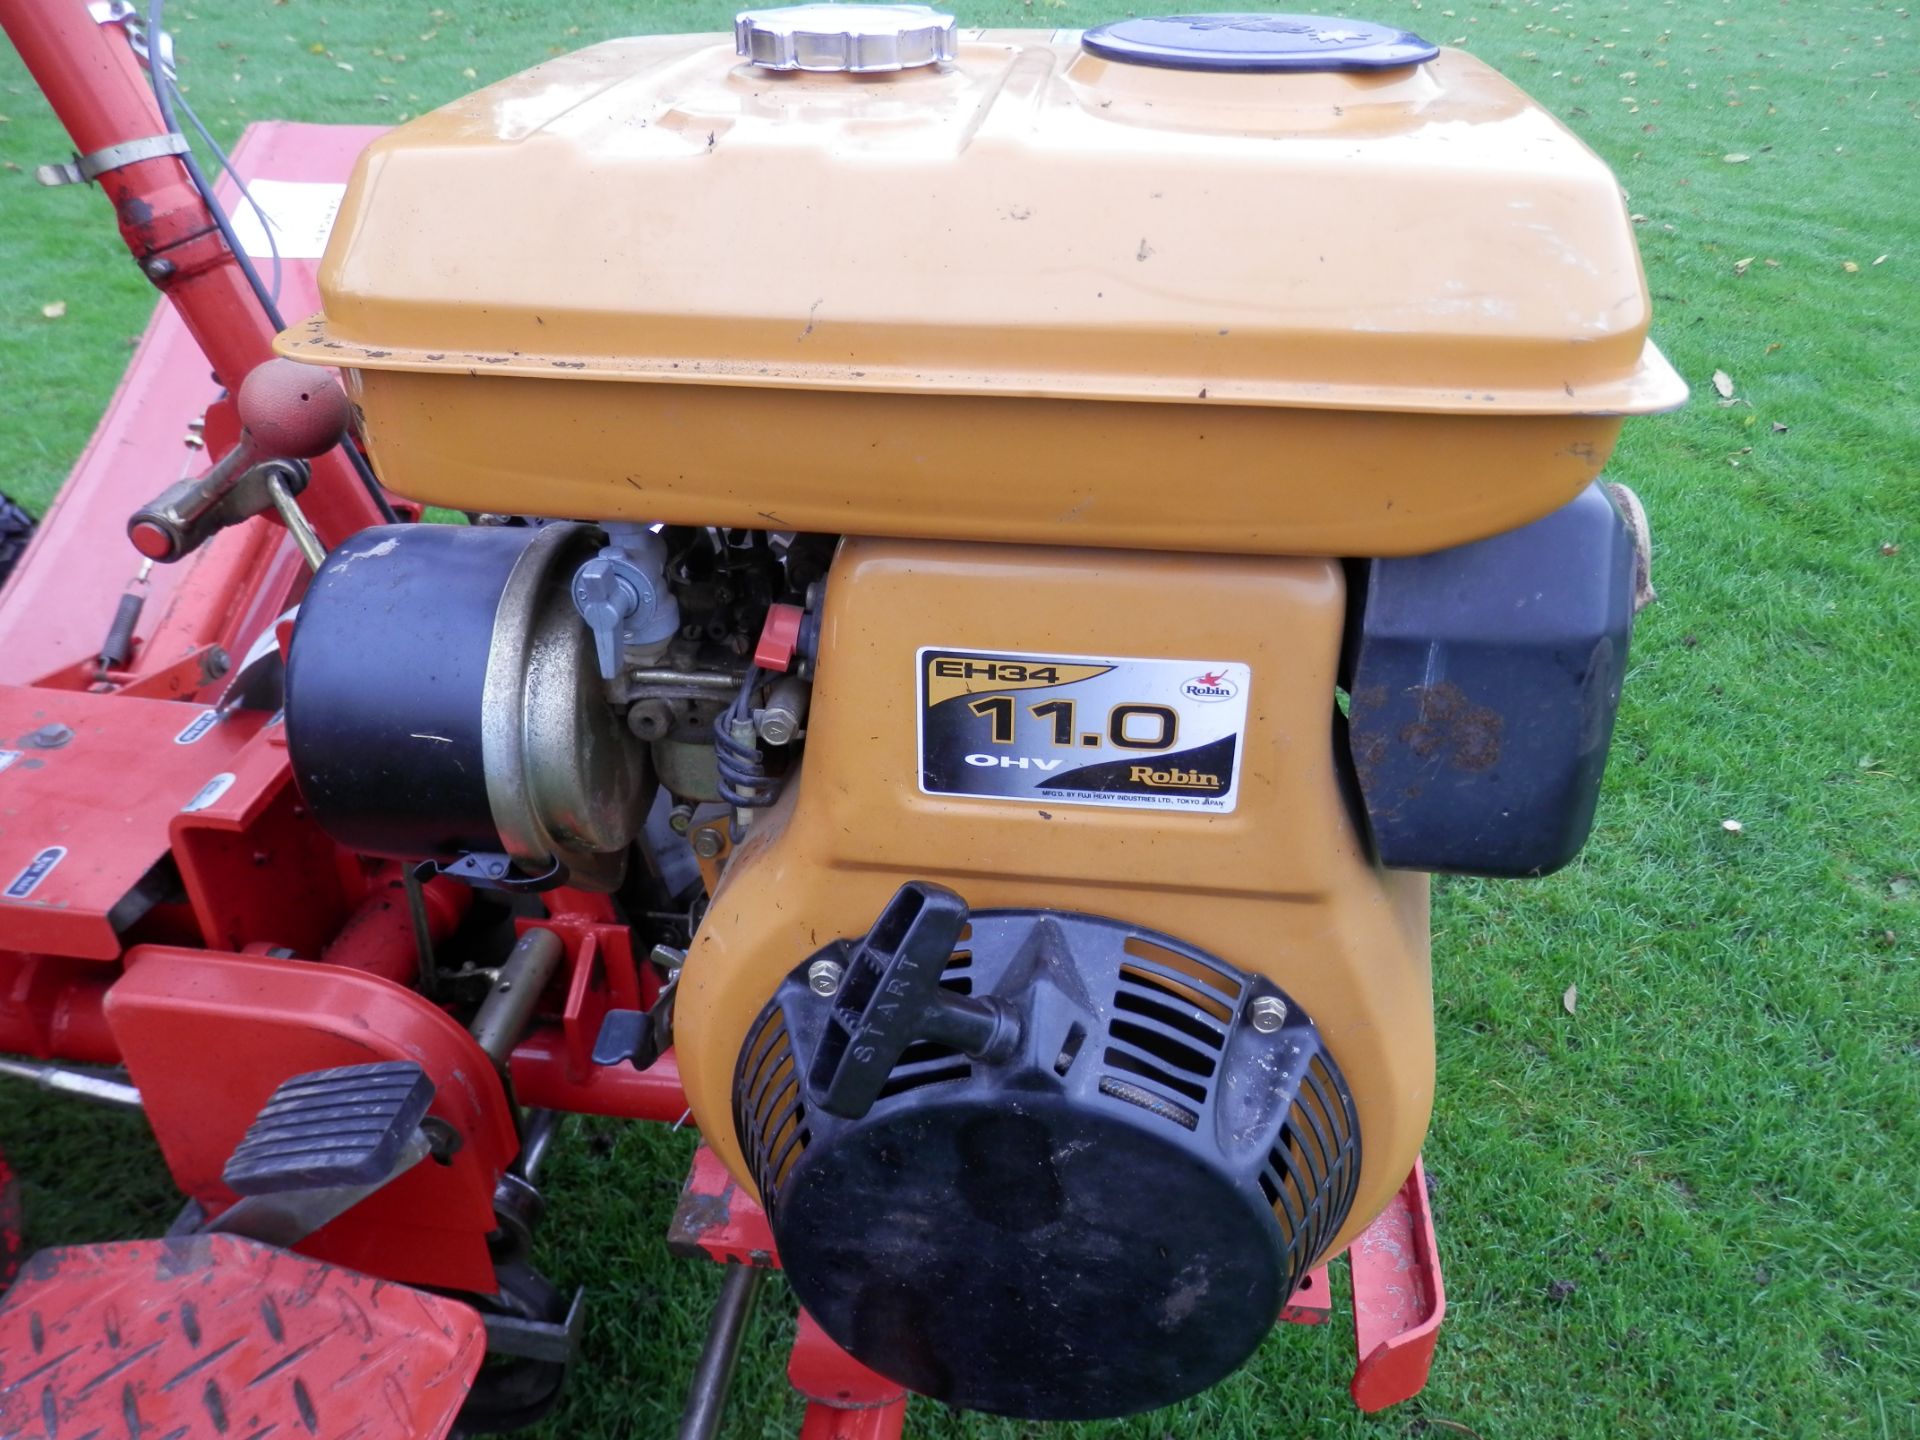 ALL WORKING SAXON TRIPLE MK2 RIDE ON MOWER, UPGRADED WITH GEARS, BRAKE PEDAL & DIFF LOCK. - Image 5 of 14